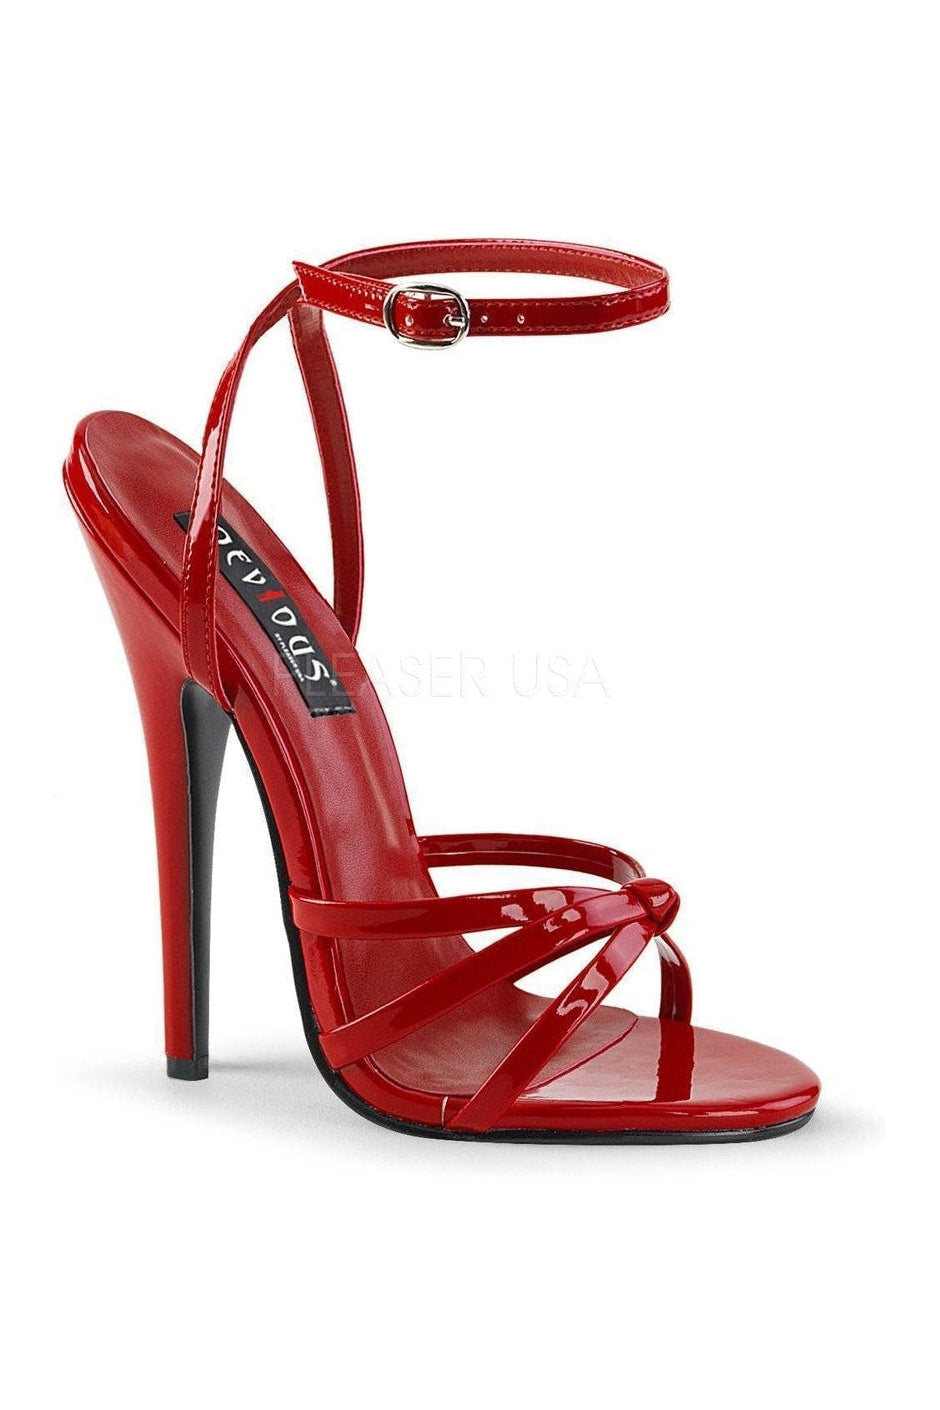 Stiletto Heels – SEXY SHOES | SEXYSHOES.COM